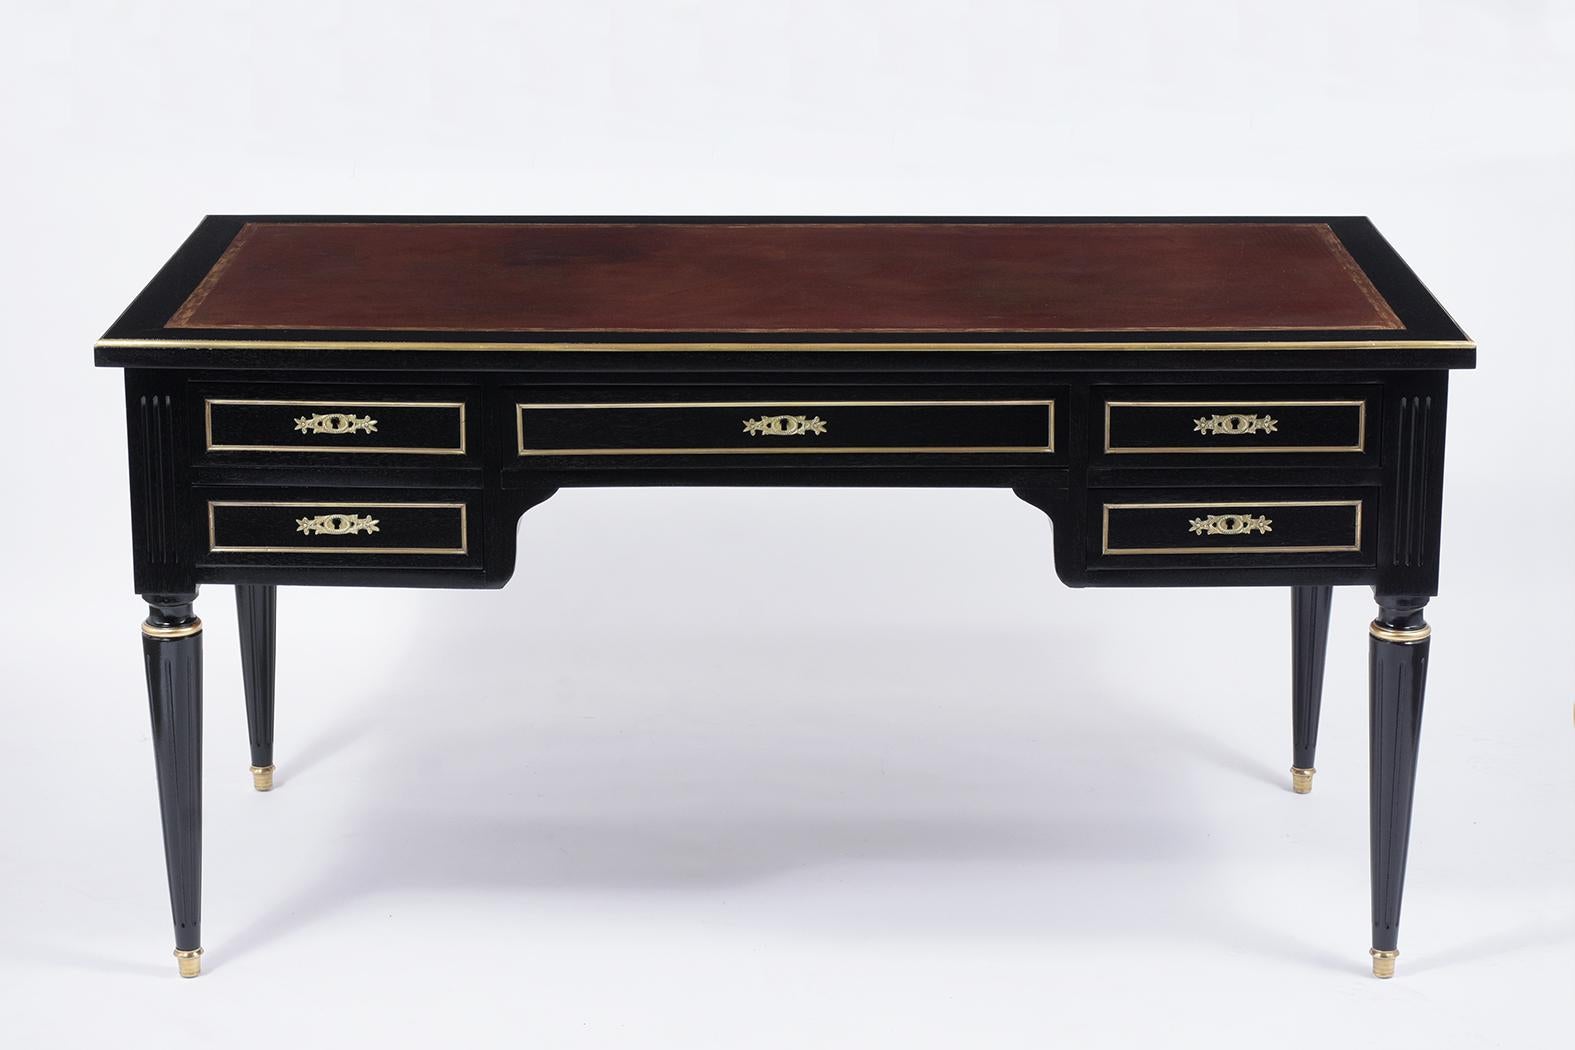 This French 1880s Louis XVI desk is handcrafted of mahogany wood stained a dark ebonized color with a beautiful newly lacquered finish. The top of the desk features original embossed leather newly dyed in Cordova color finish, gilt brass molding